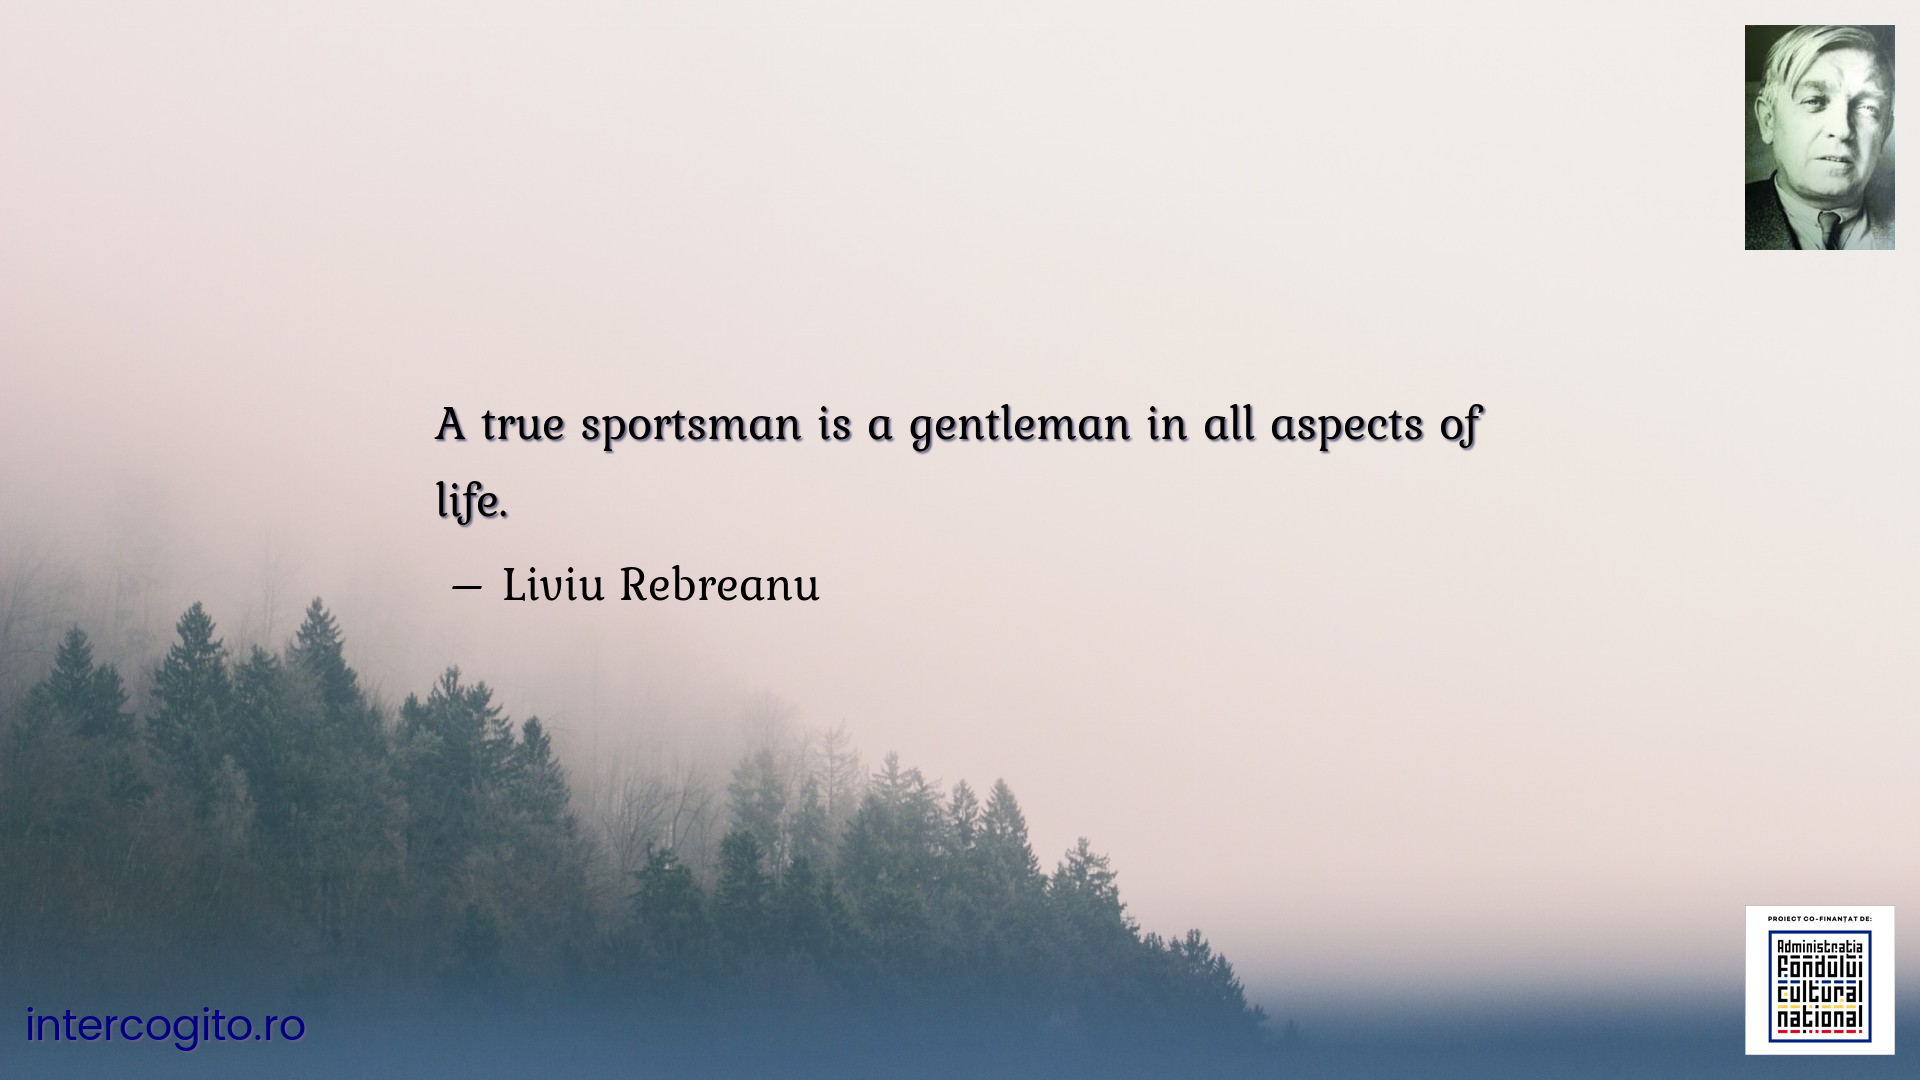 A true sportsman is a gentleman in all aspects of life.